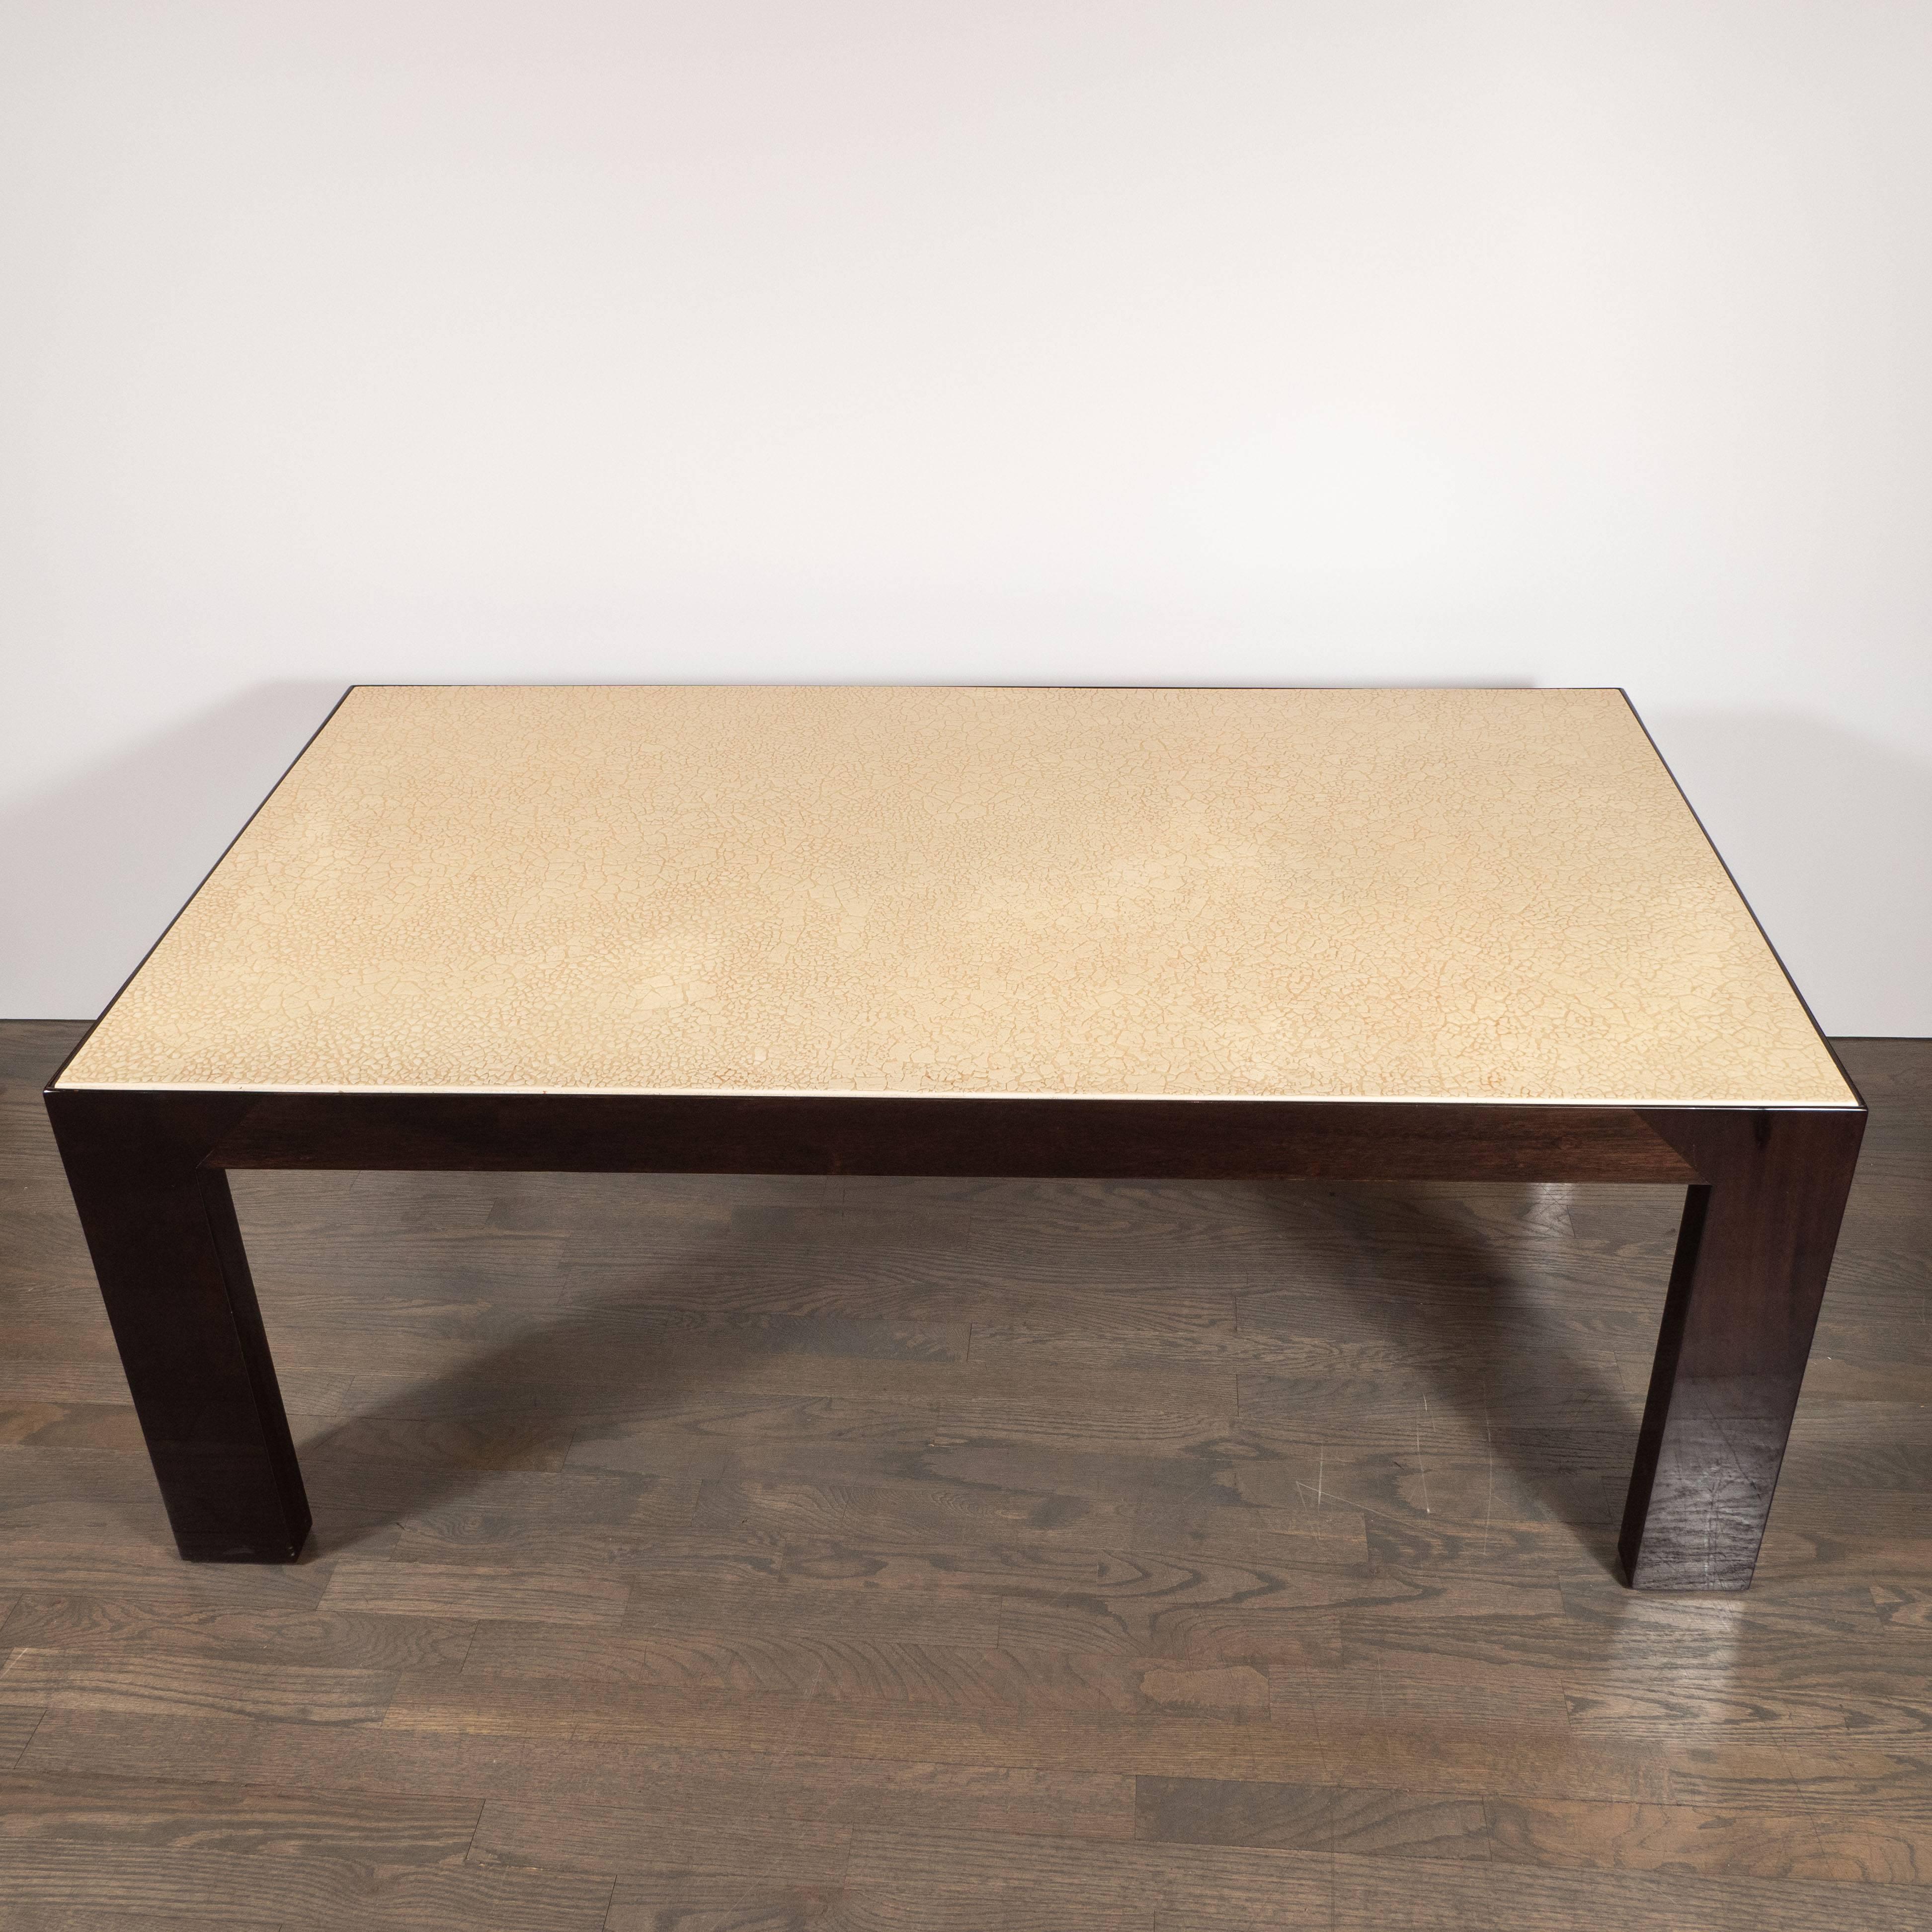 American Mid-Century Modern Parson Style Handrubbed Walnut and Craqueleur Cocktail Table